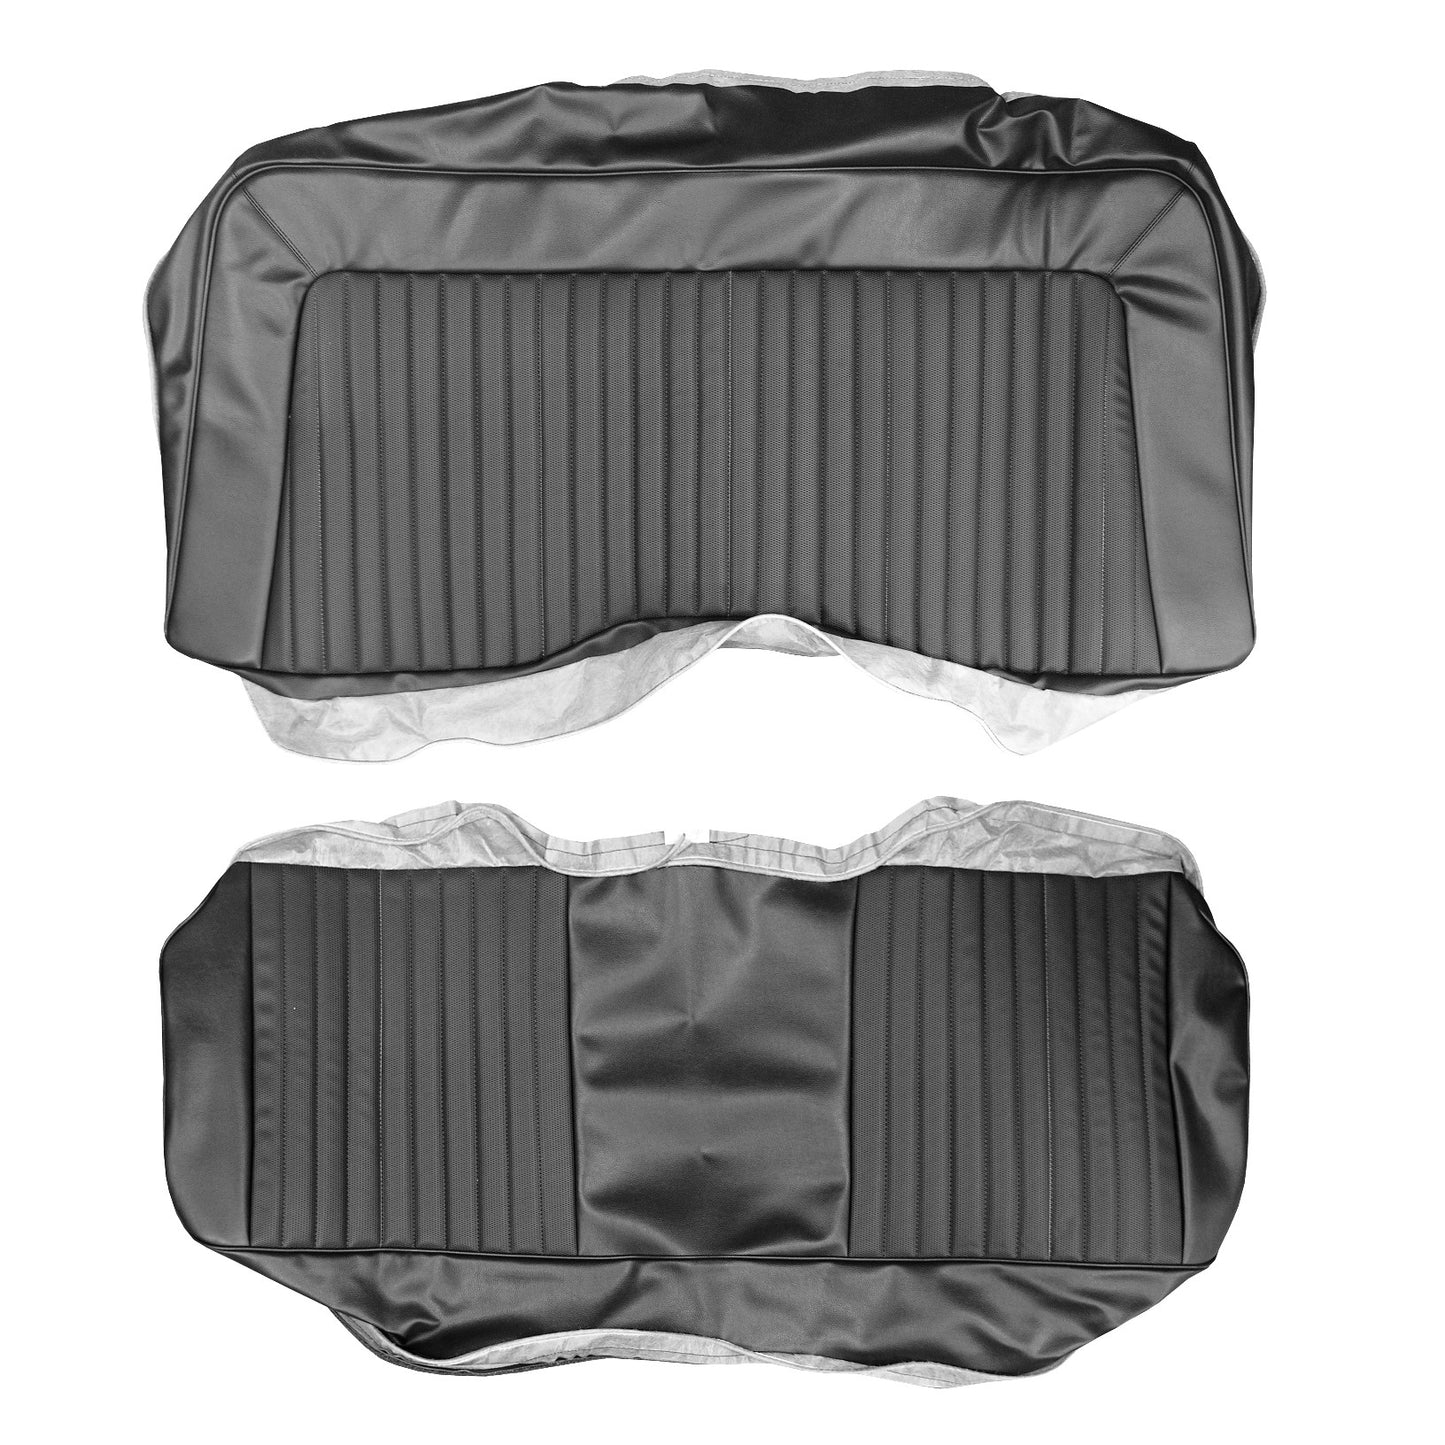 72 BARRACUDA/ CHALLENGER REAR UPHOLSTERY - BLACK